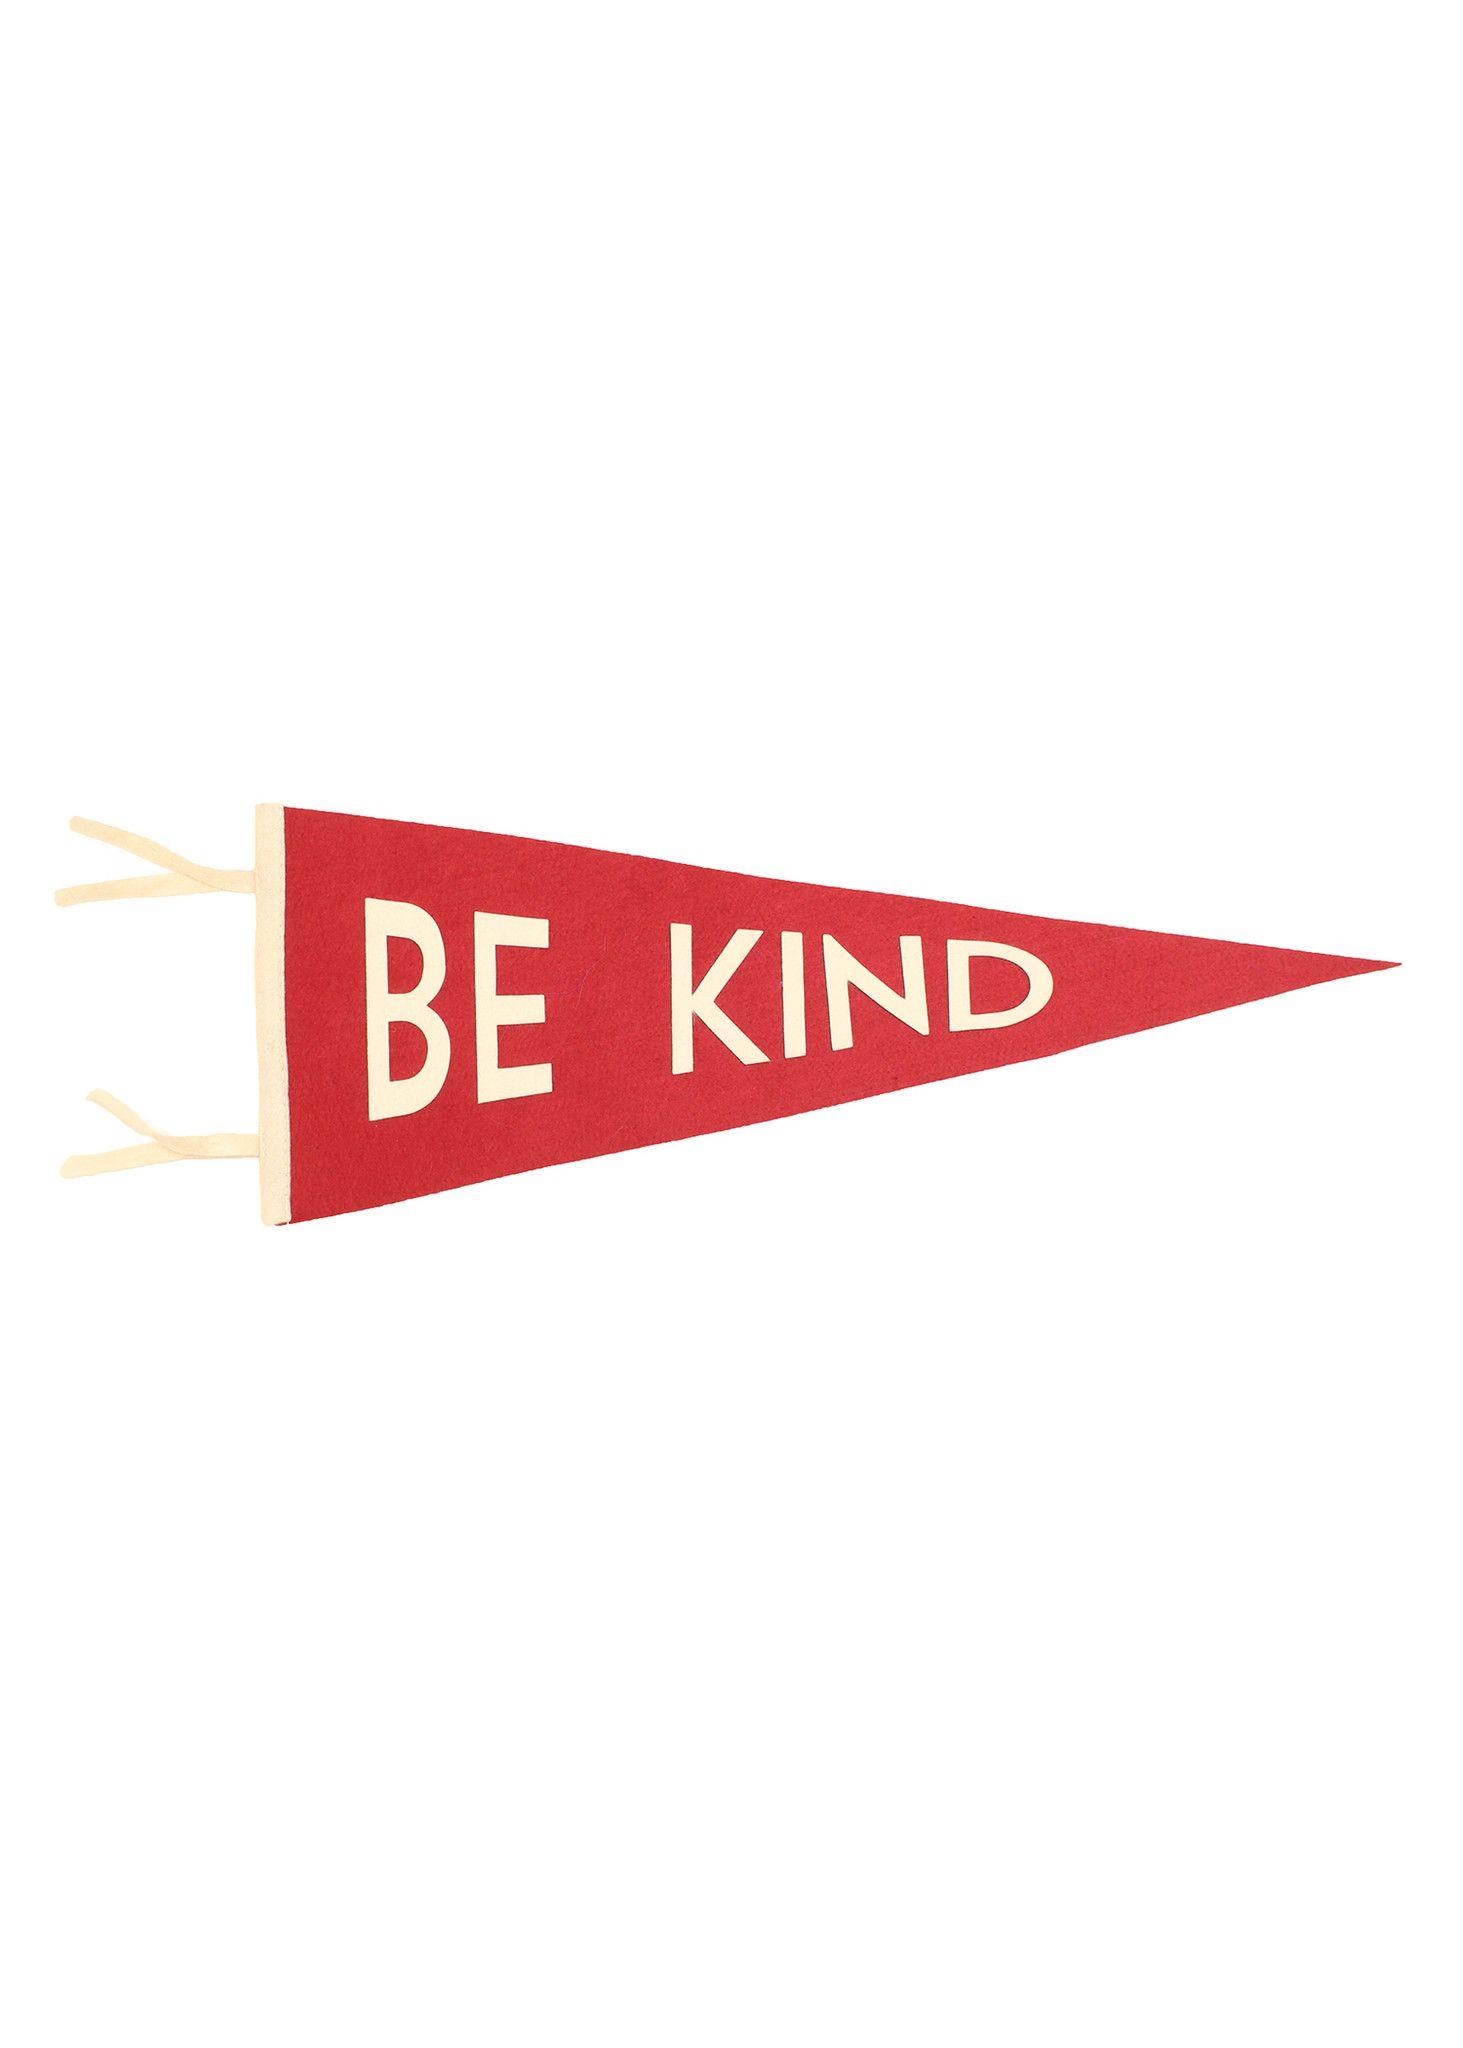 9 Red and White with Letters and Logo - Be Kind Pennant | Kindness, Charity, Giving | Pinterest | Red ...